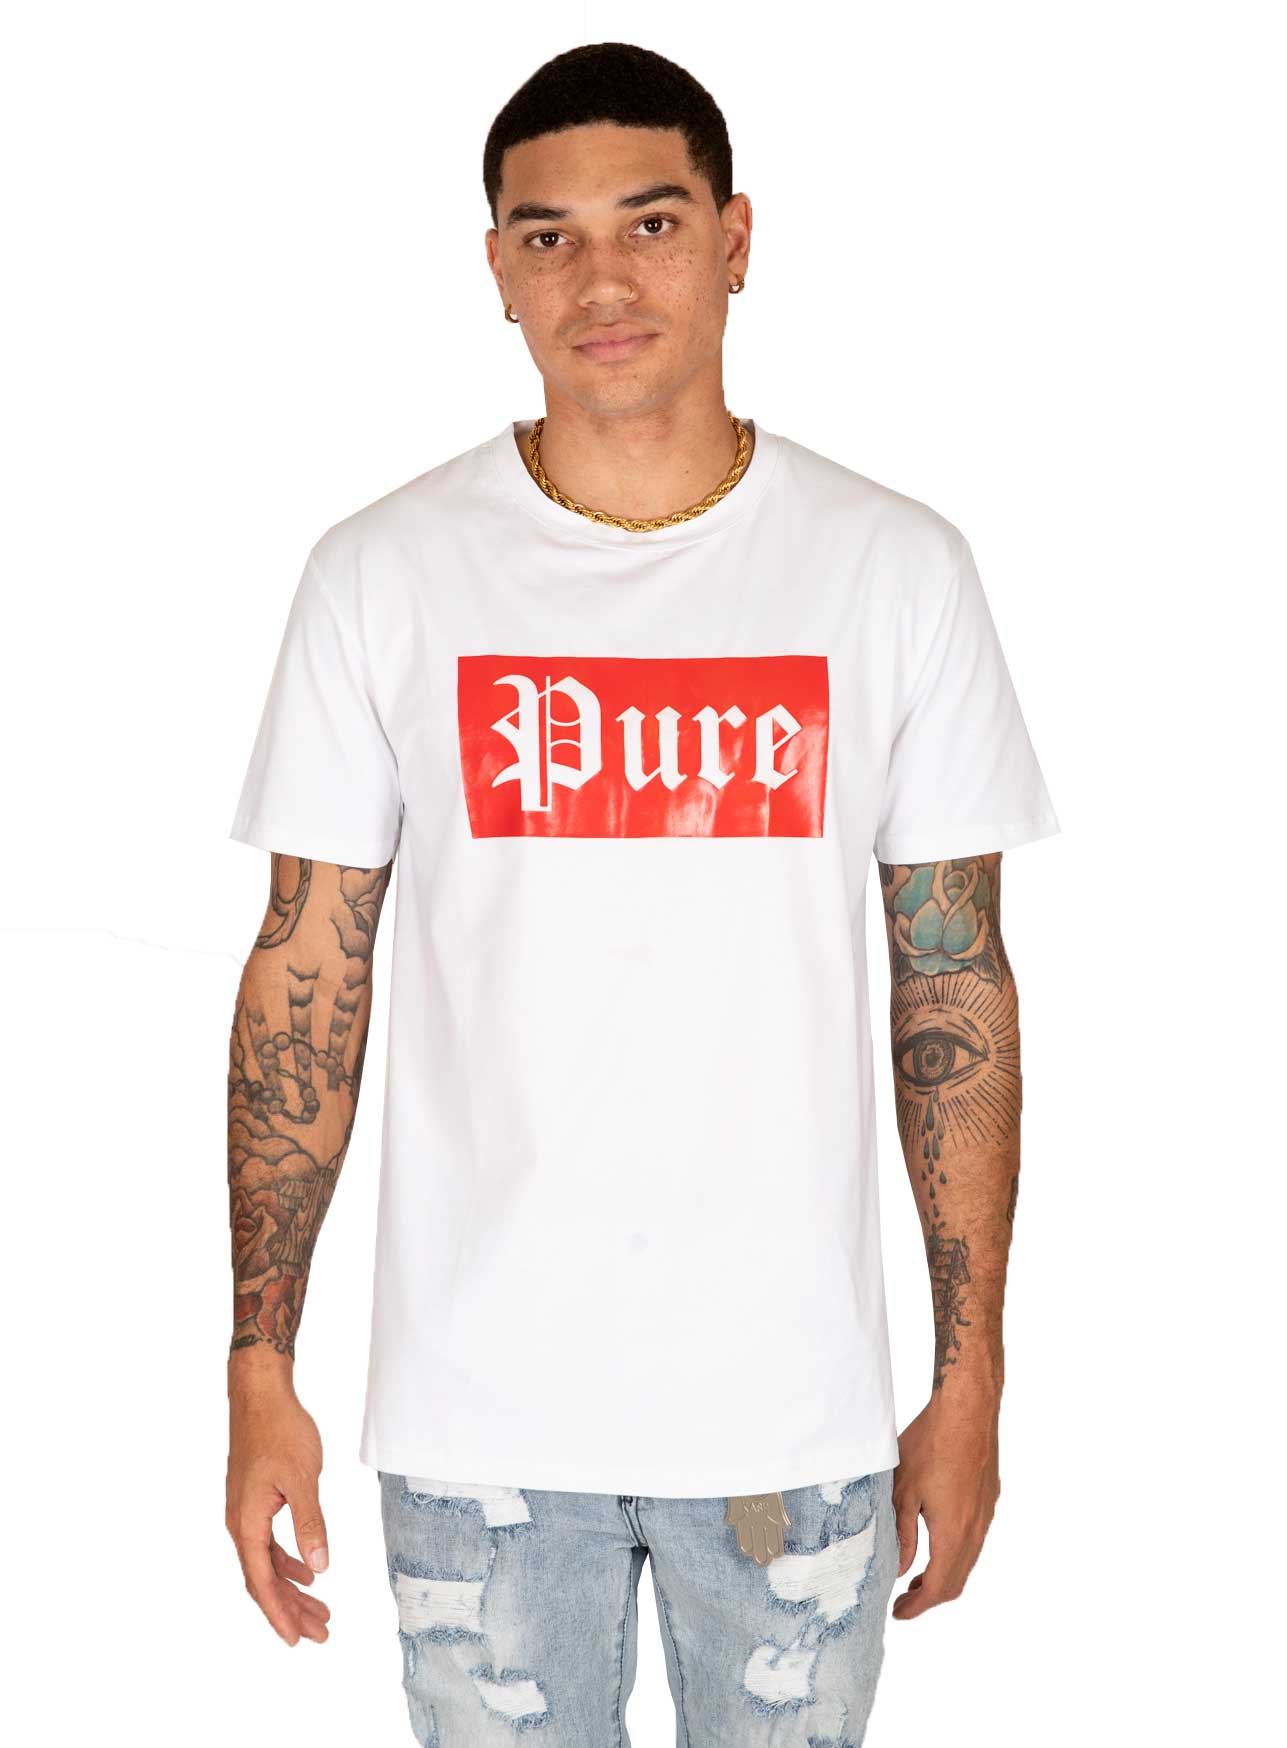 NEW 2021 STRETCH PURE TEE W| RED BLOCK LOGO